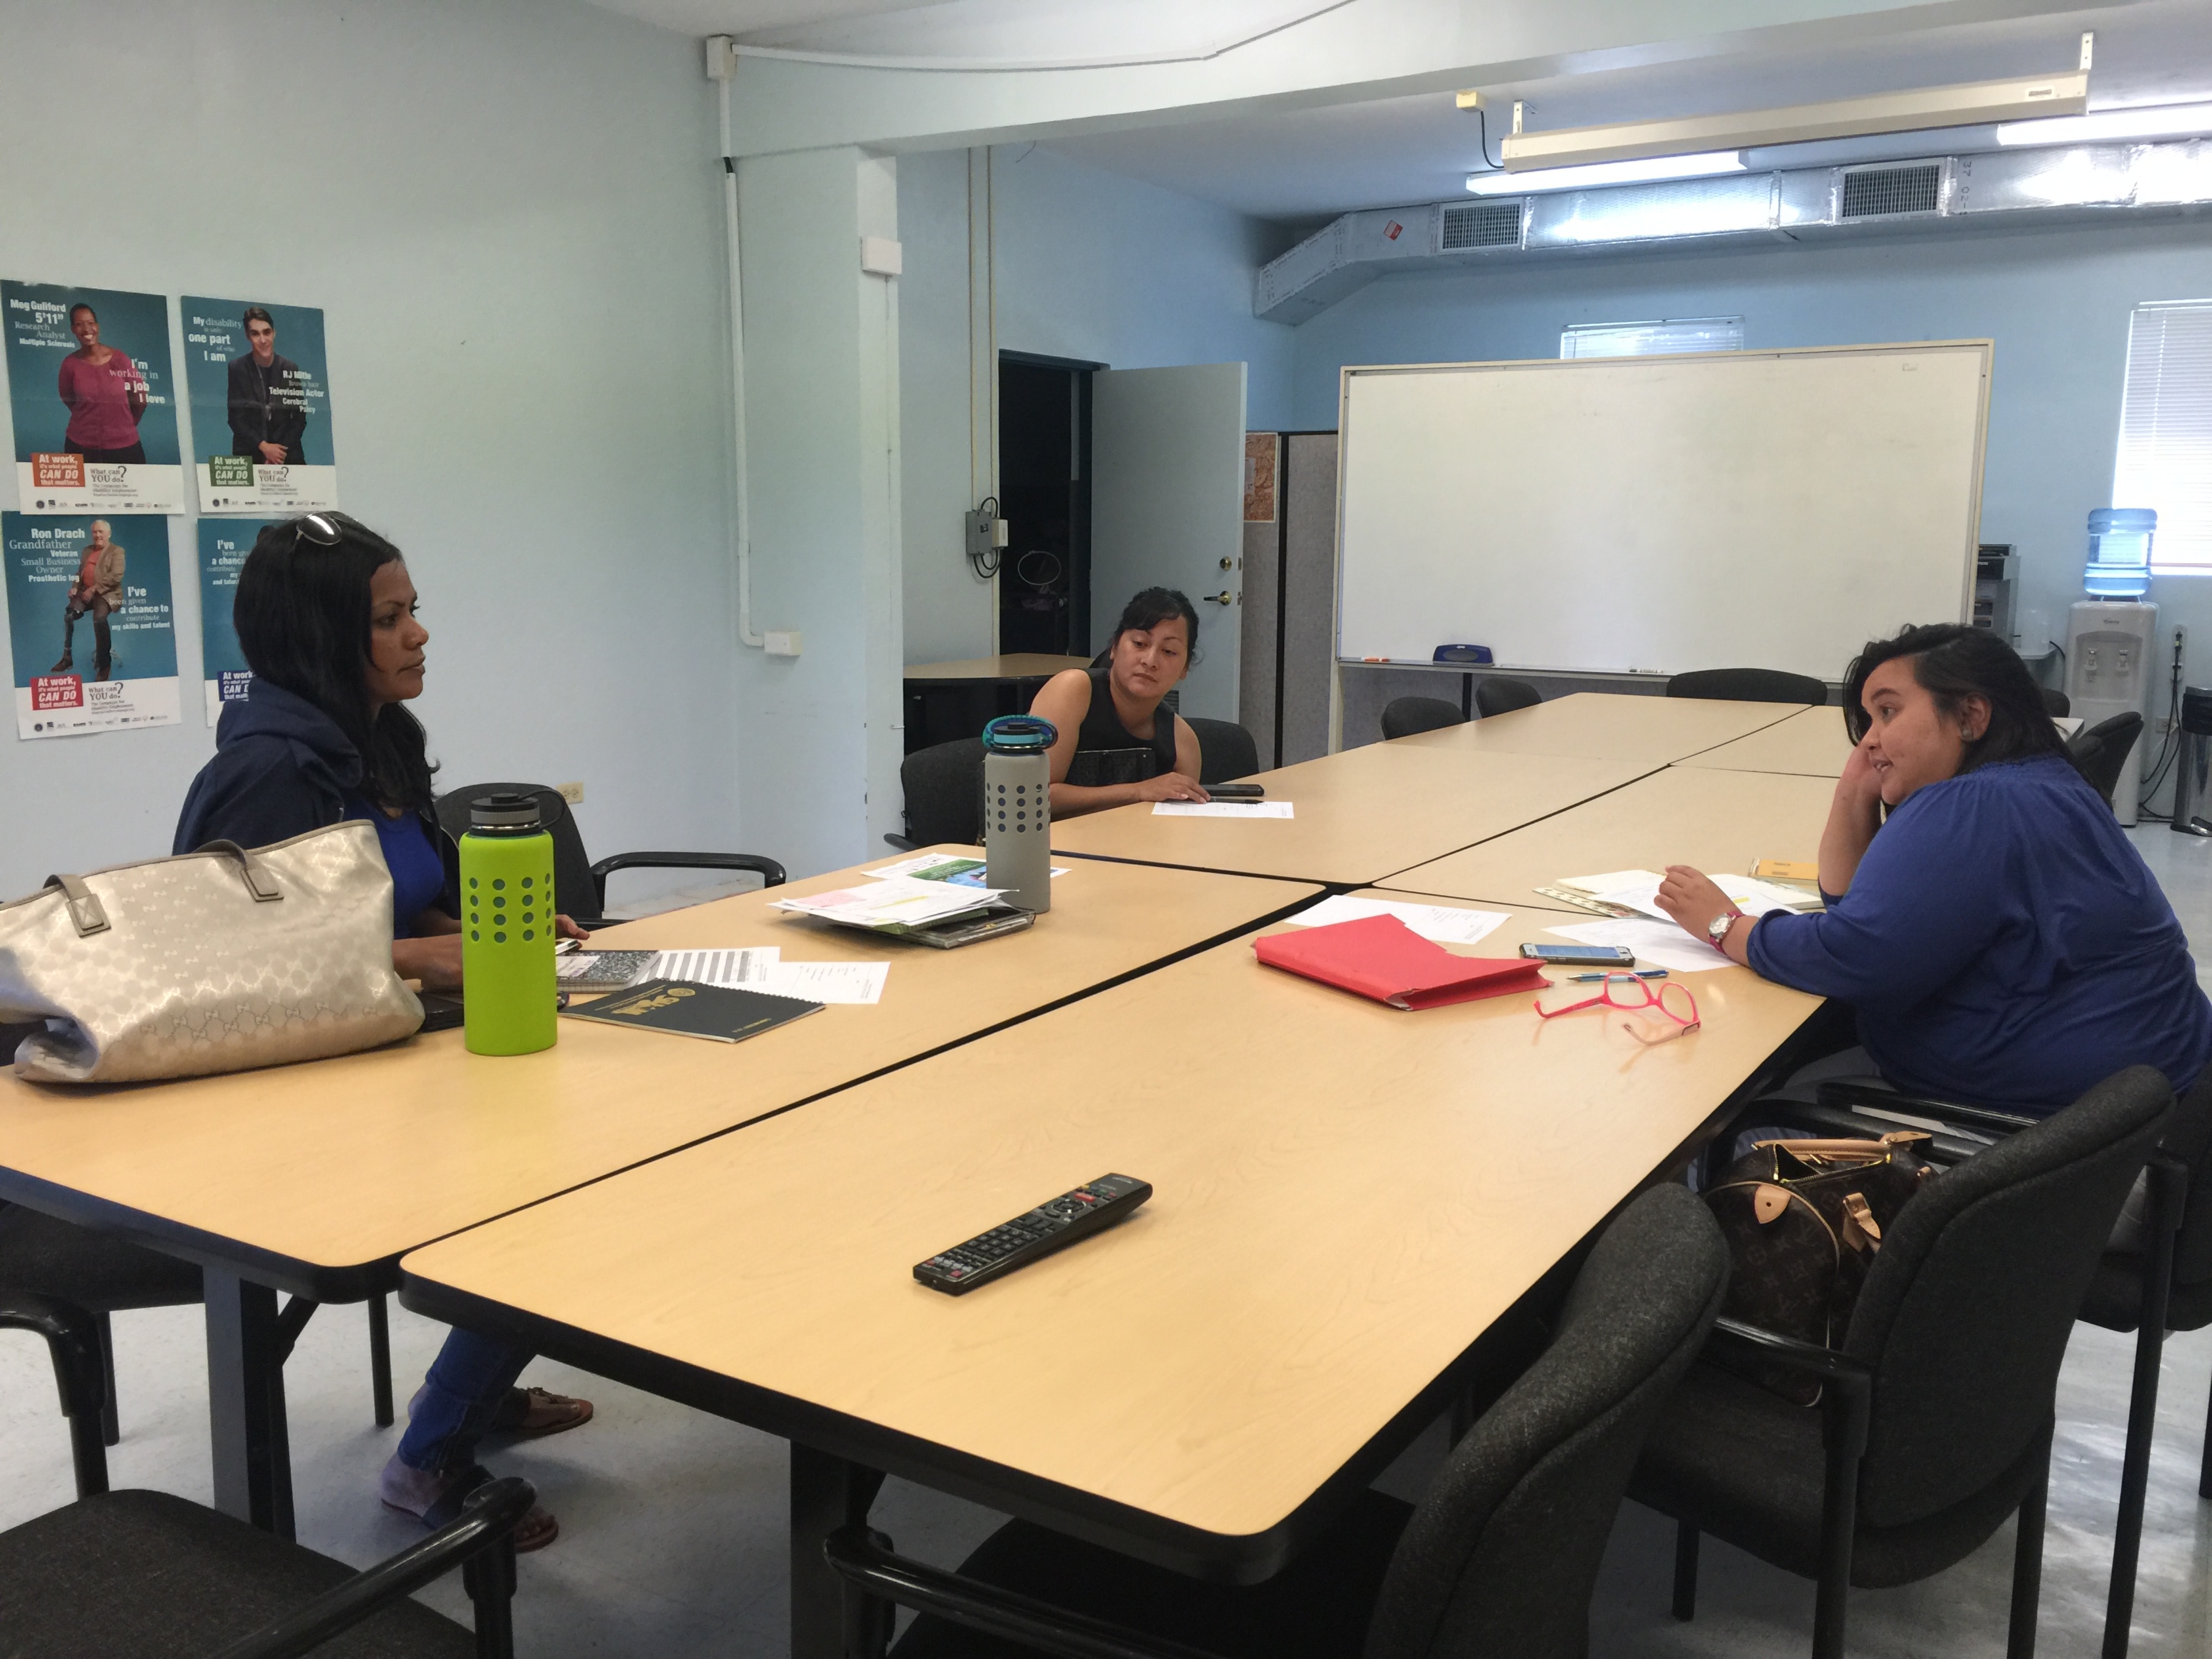 Representatives from Guam's early childhood programs meet to plan this year's "Power of Play- Fun in Your Backyard" at GSAT on May 18, 2016. From left to right- Terry Naputi, Guam CEDDERS Research Associate; R-Leen Mario, GEIS; and Lauren Sanchez, Head Start.